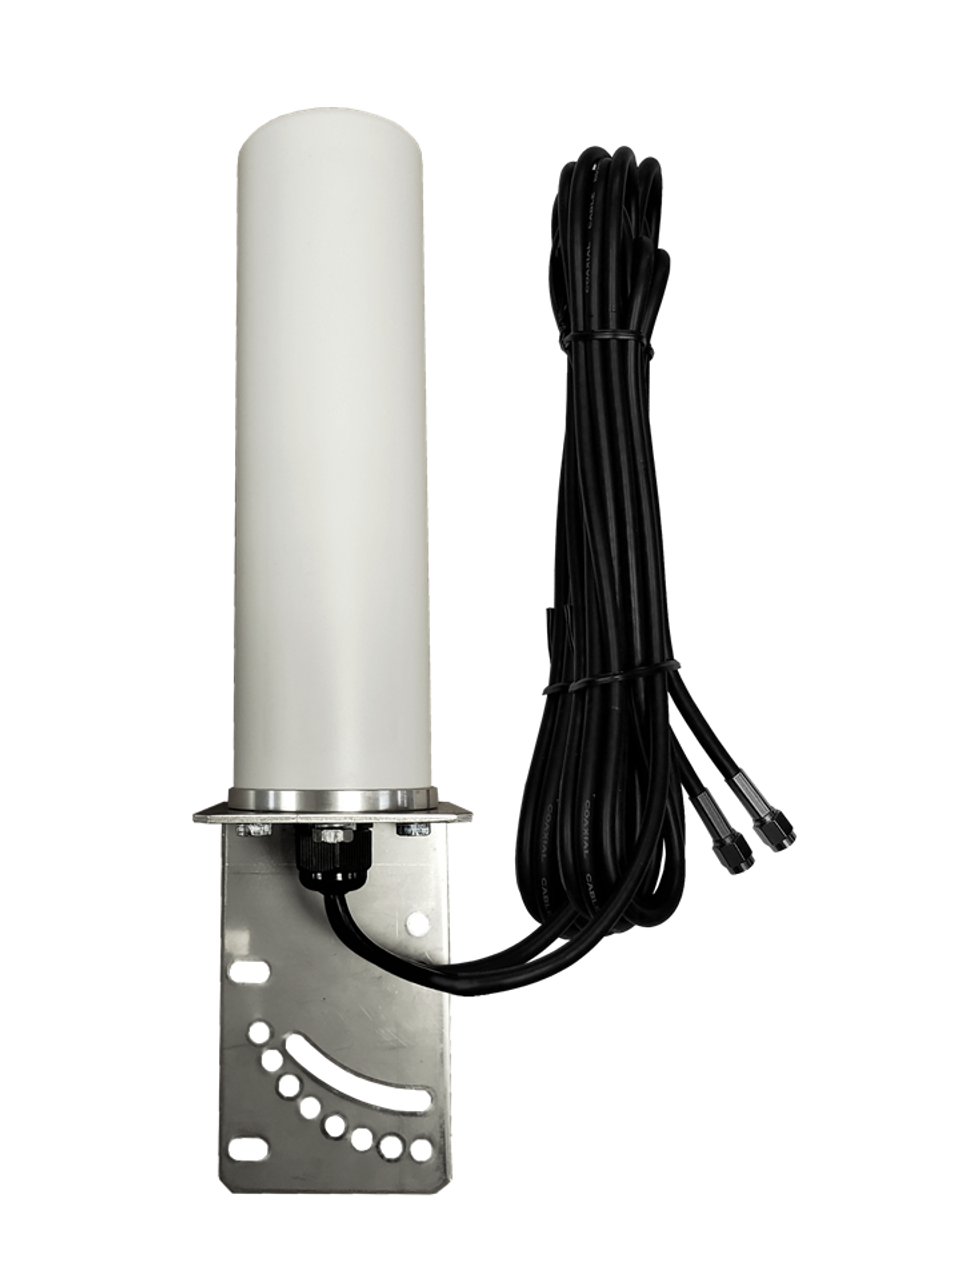 Peplink BR1-MK2 - M19 Omni Directional MIMO Cellular 4G 5G LTE AWS XLTE M2M IoT Antenna w/16ft Coax Cables -2  x SMA